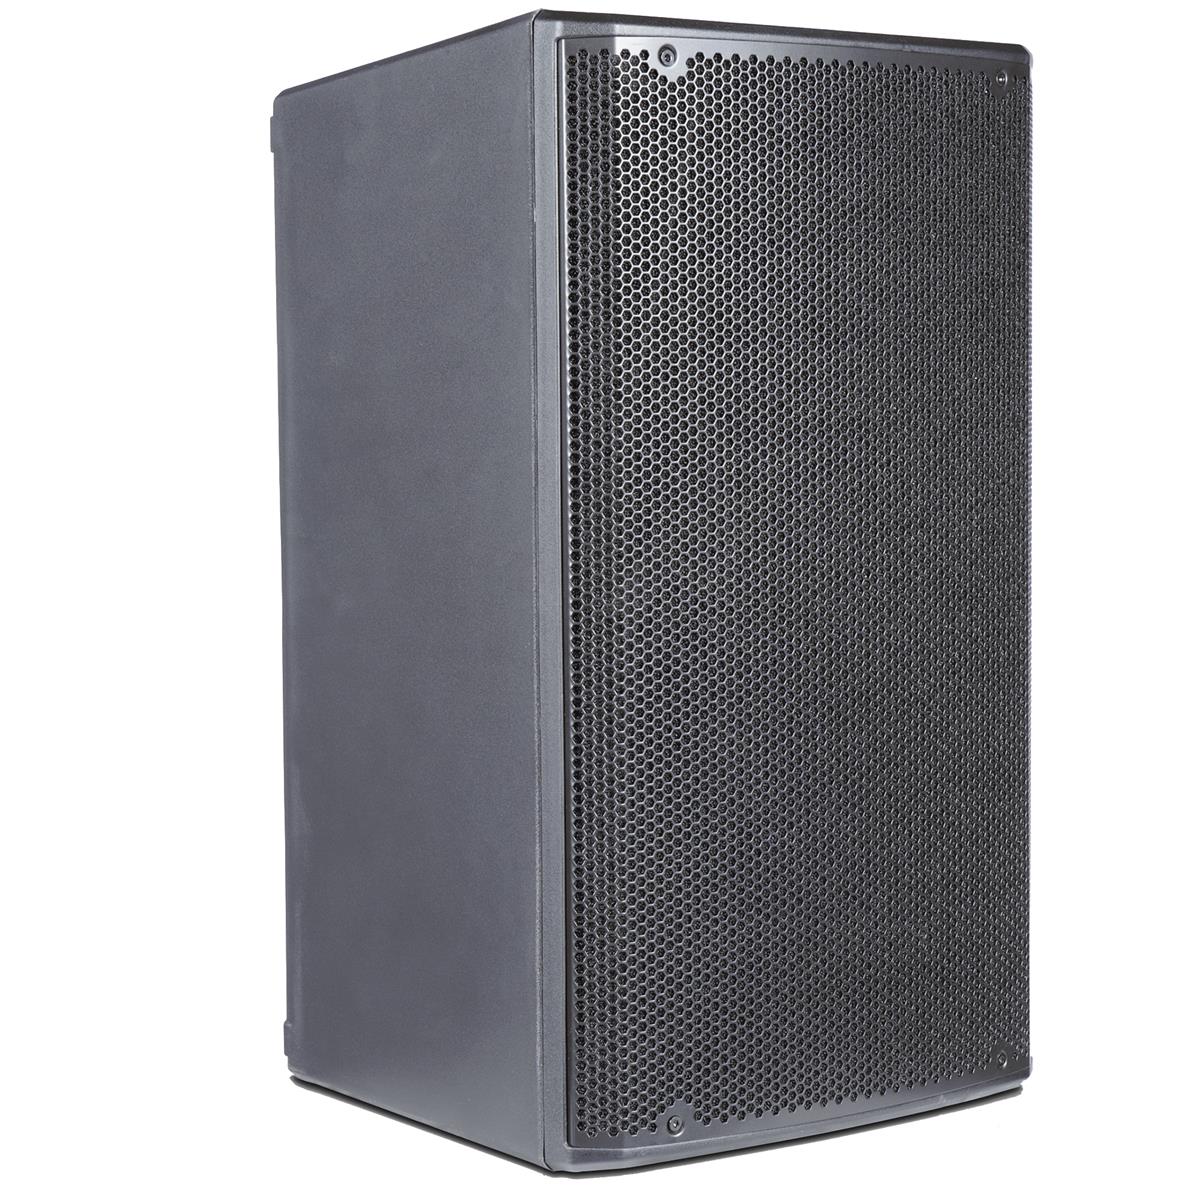 2-Way Active Speaker with 15" Woofer, 600W RMS, Single - dB Technologies OPERA 15